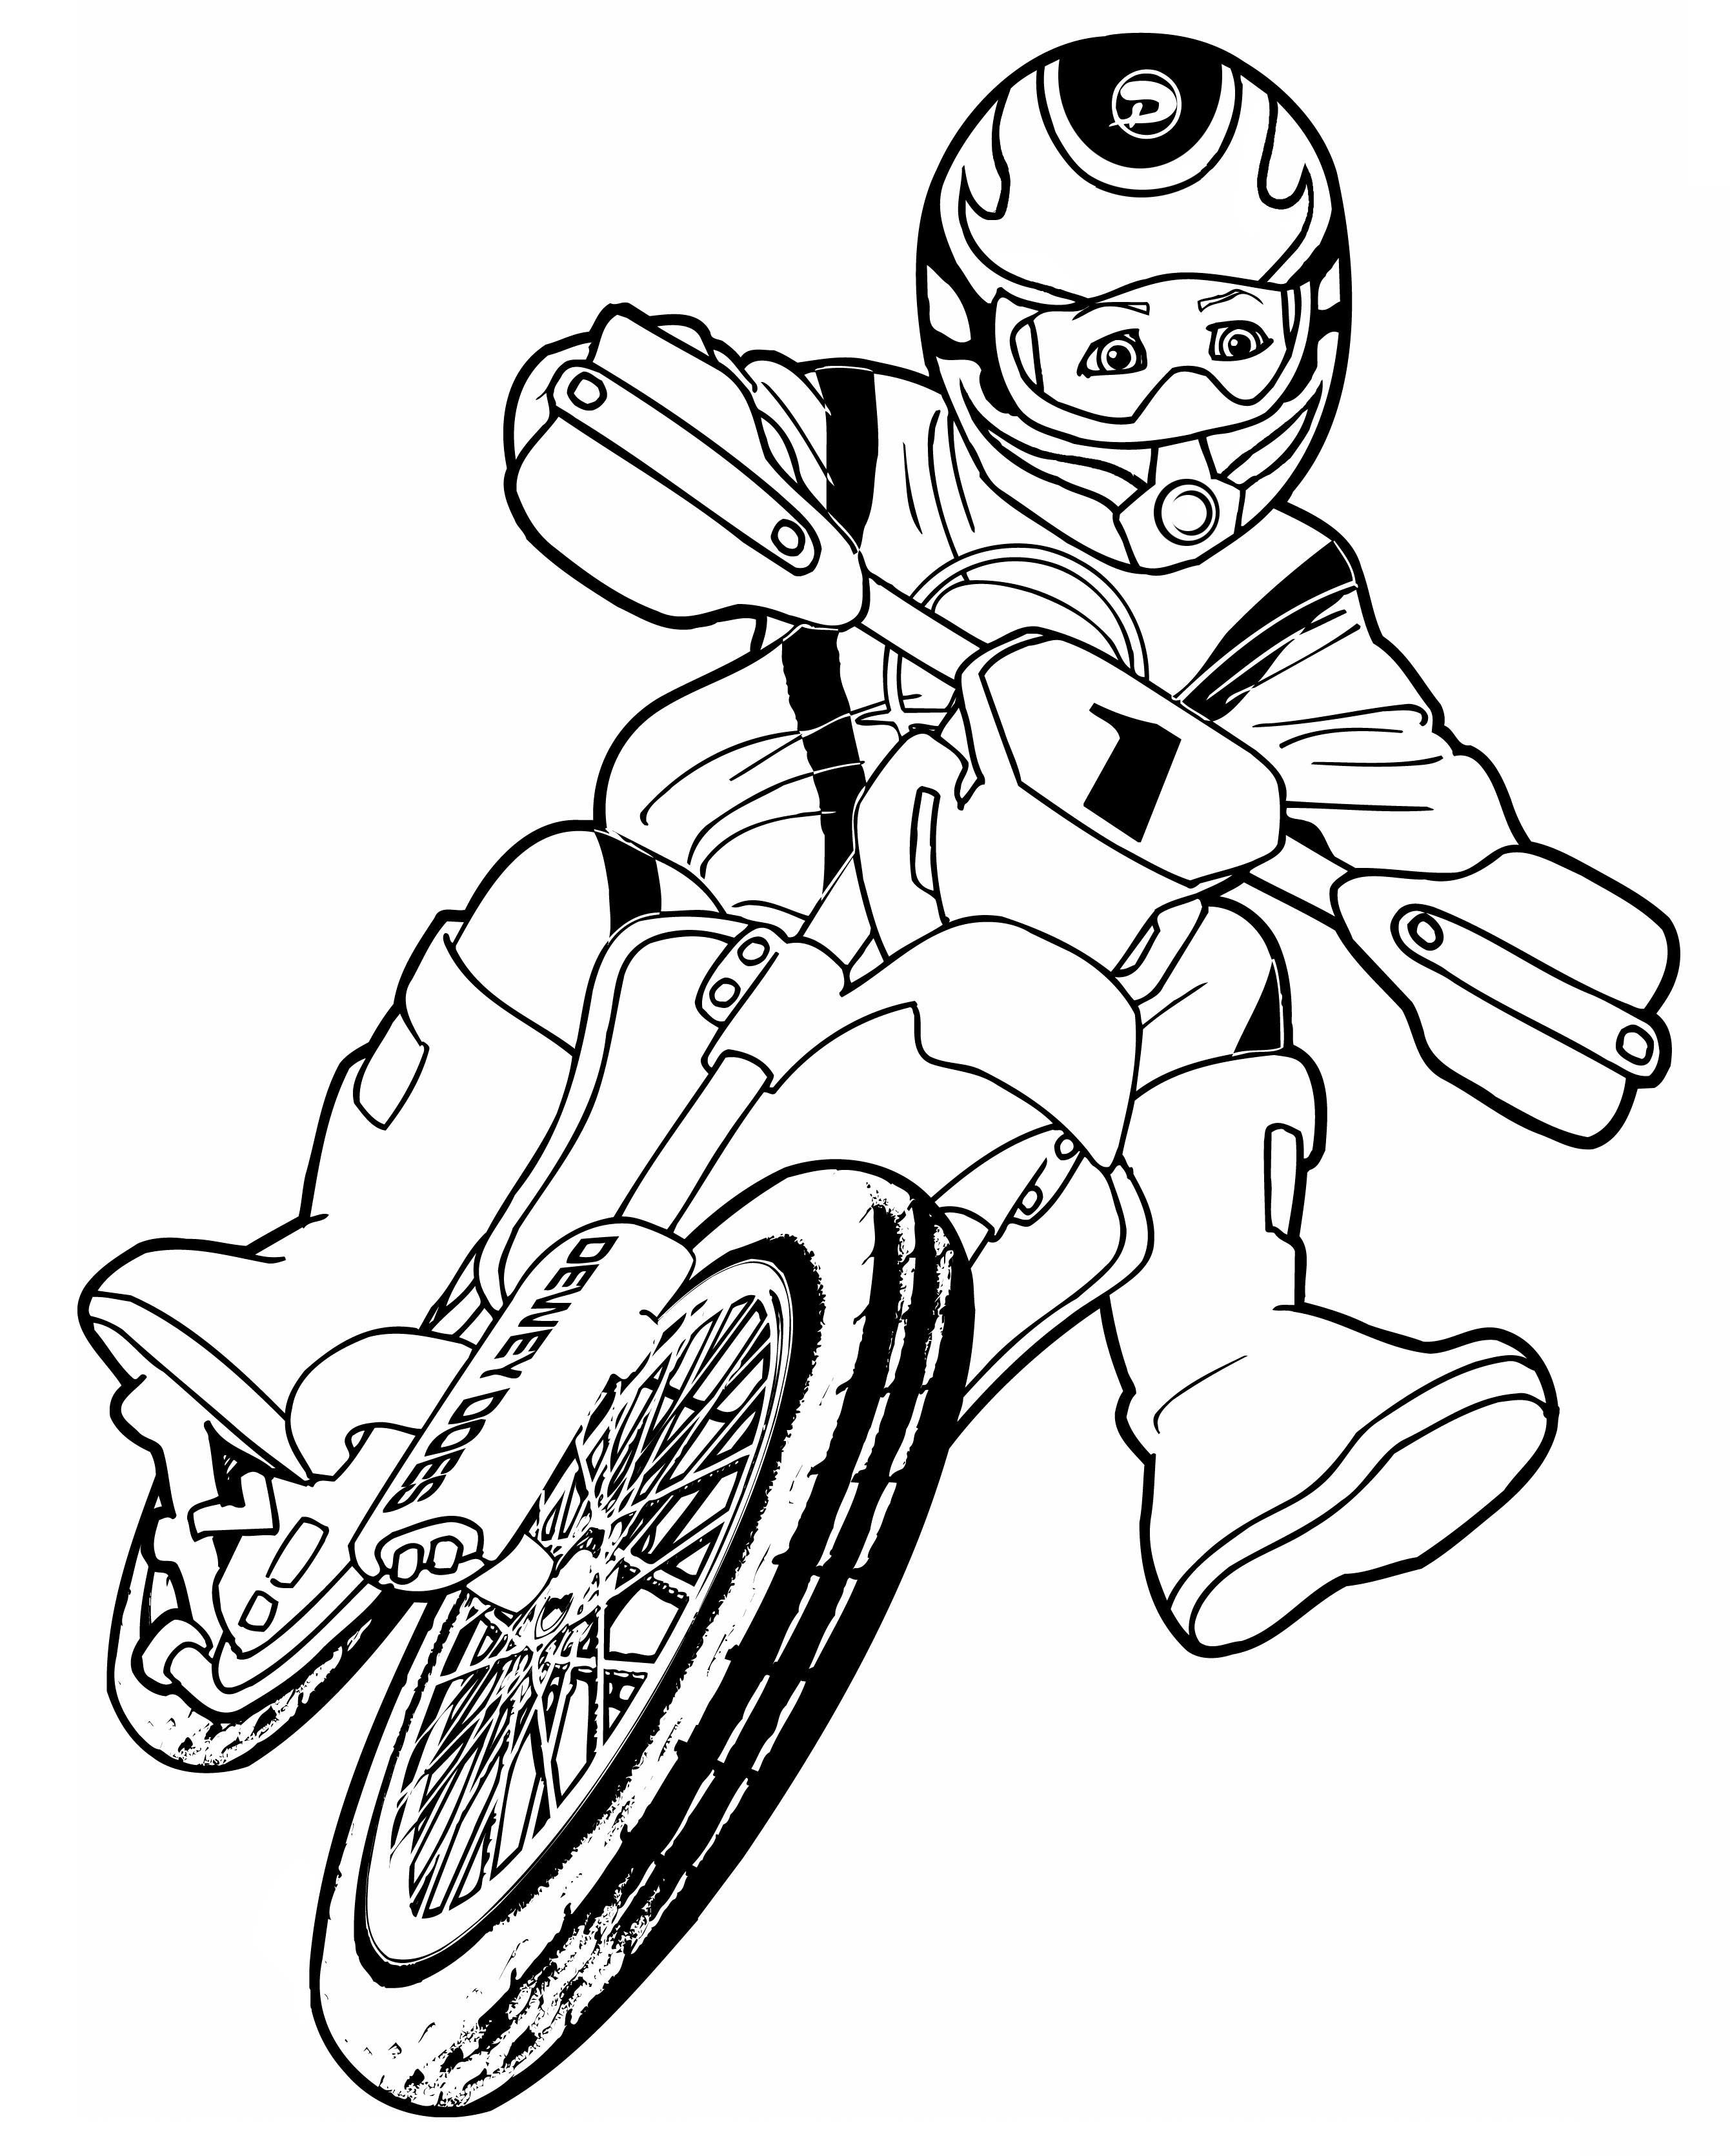 Dirt Bike Coloring Pages Pdf to Print - Dirt Bike Coloring Pages For Kids